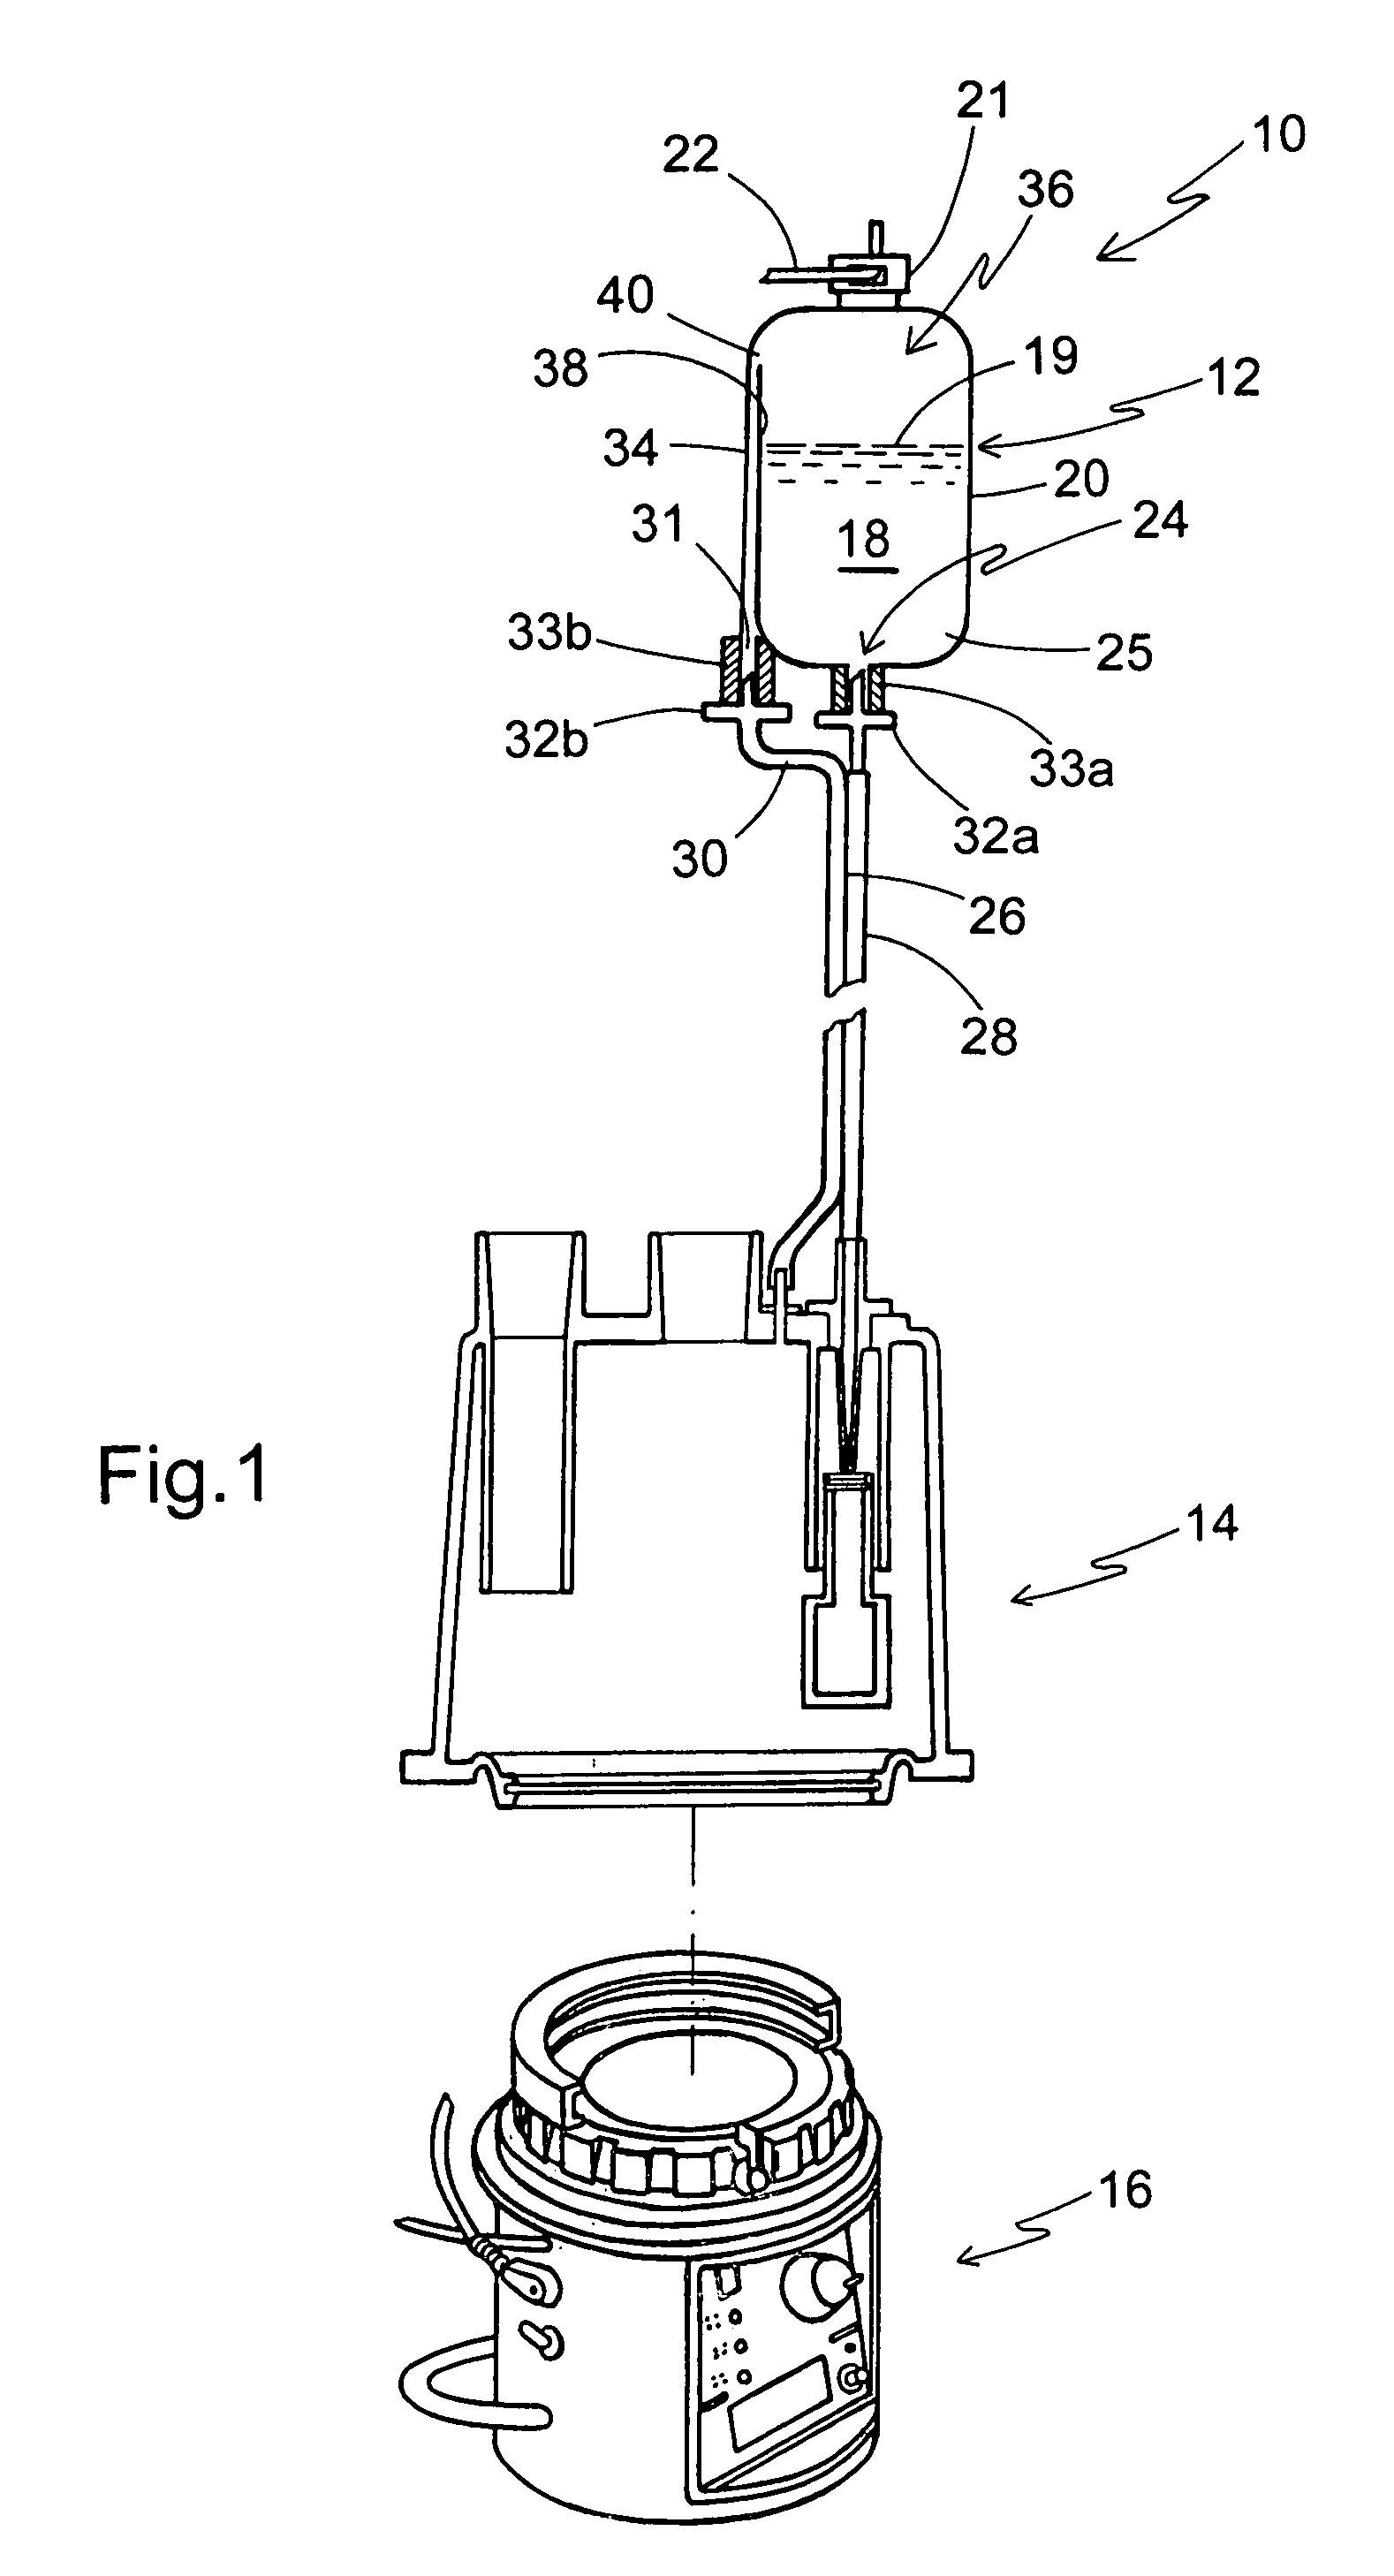 Apparatus for equalizing air pressure in air respiratory system